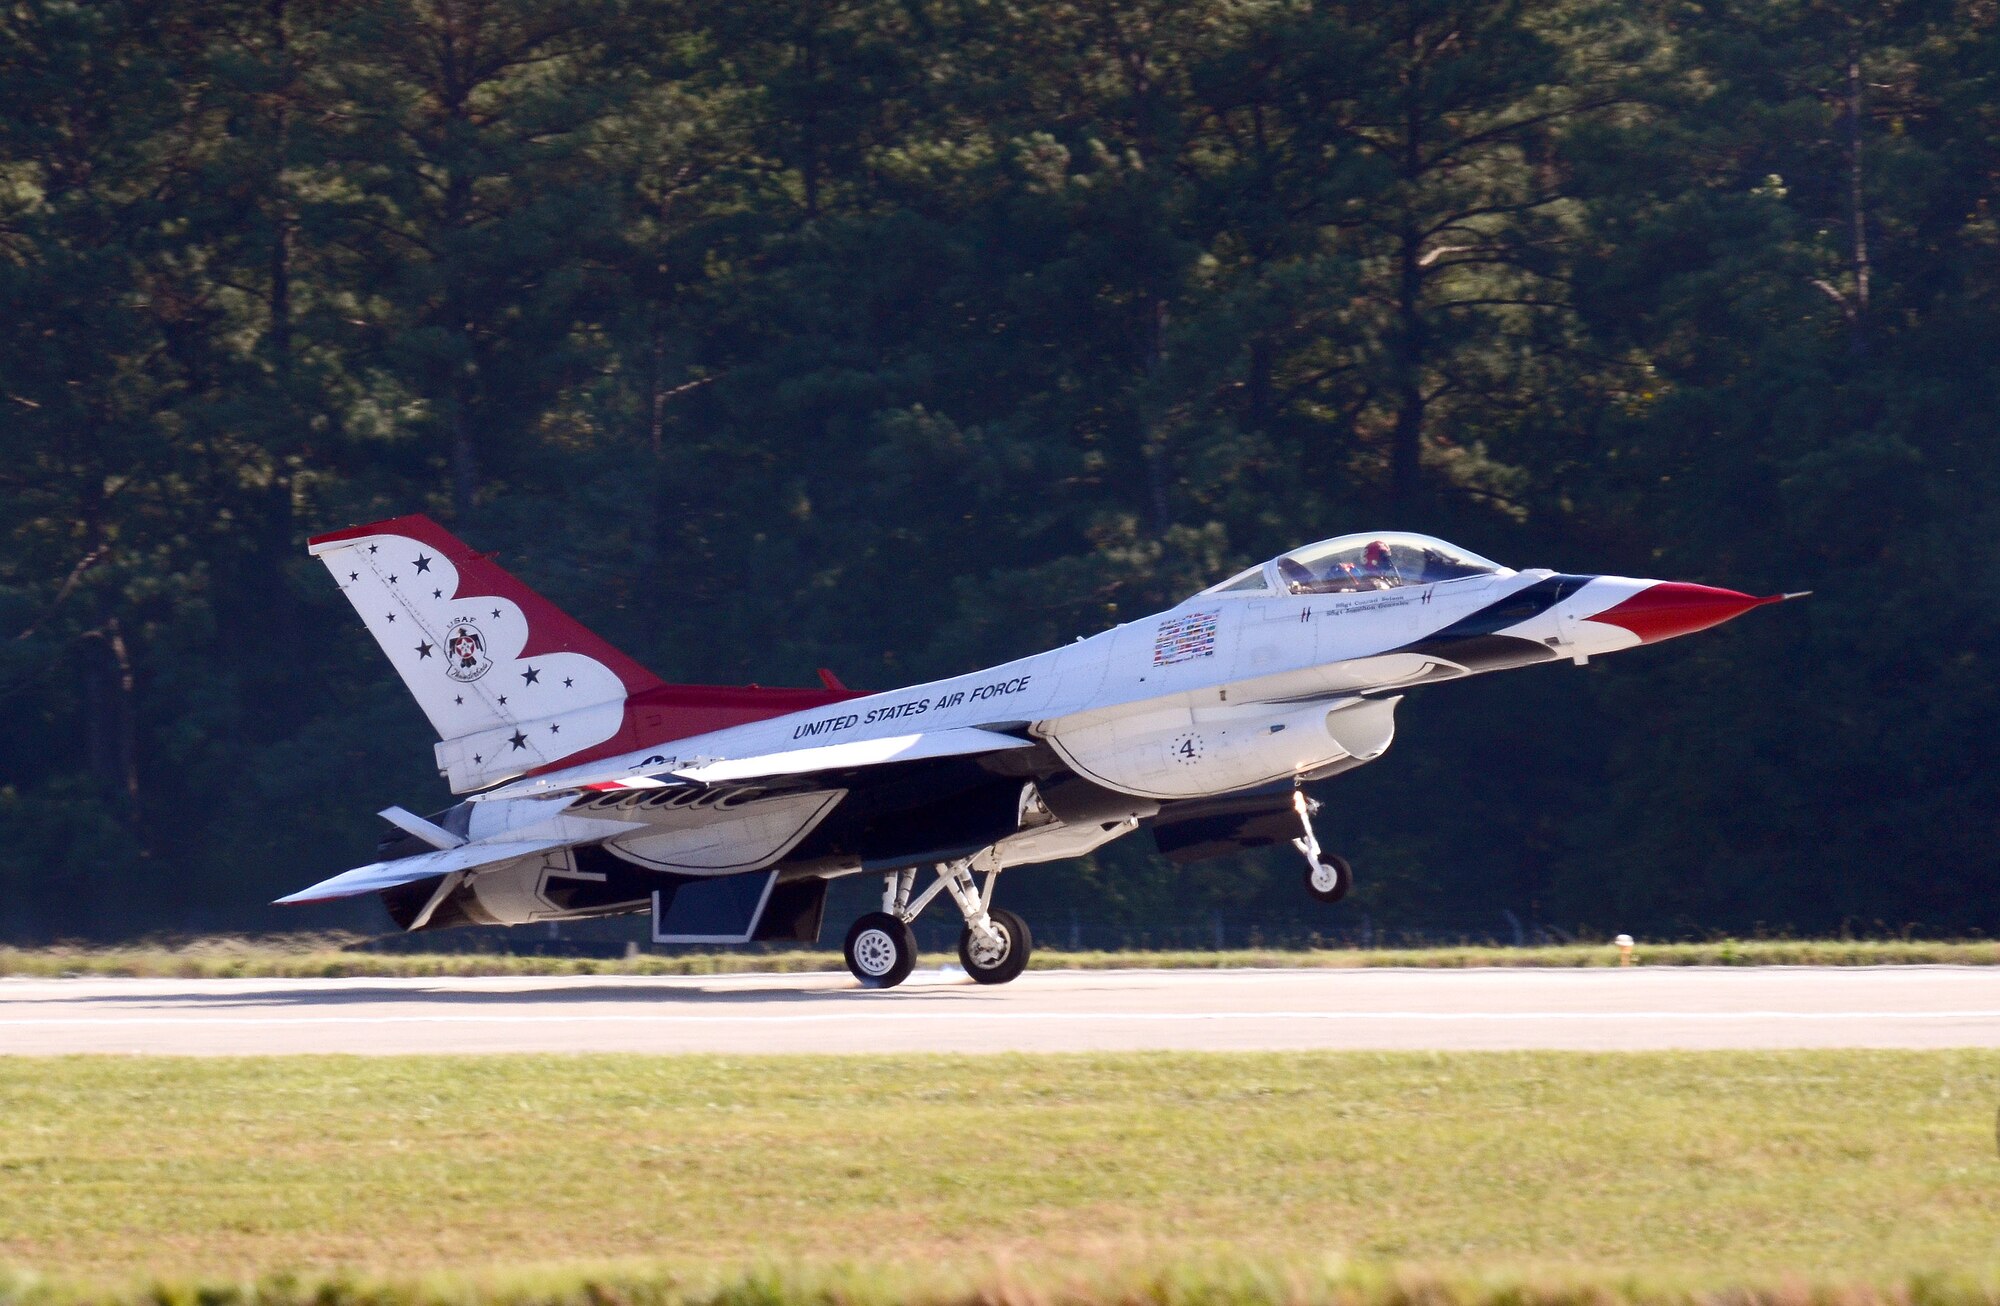 Thunderbird #4, Maj. Curtis Dougherty, flying the slot in the diamond formation, returns to Dobbins Air Reserve Base from the Wings Over North Georgia air show Oct. 18, 2014. The USAF Air Demonstration Squadron Thunderbirds are using Dobbins as their base of operations for their performances at the air show this weekend at the Russell Regional Airport in Rome, Georgia. (U.S. Air Force photo/ Brad Fallin/Released)